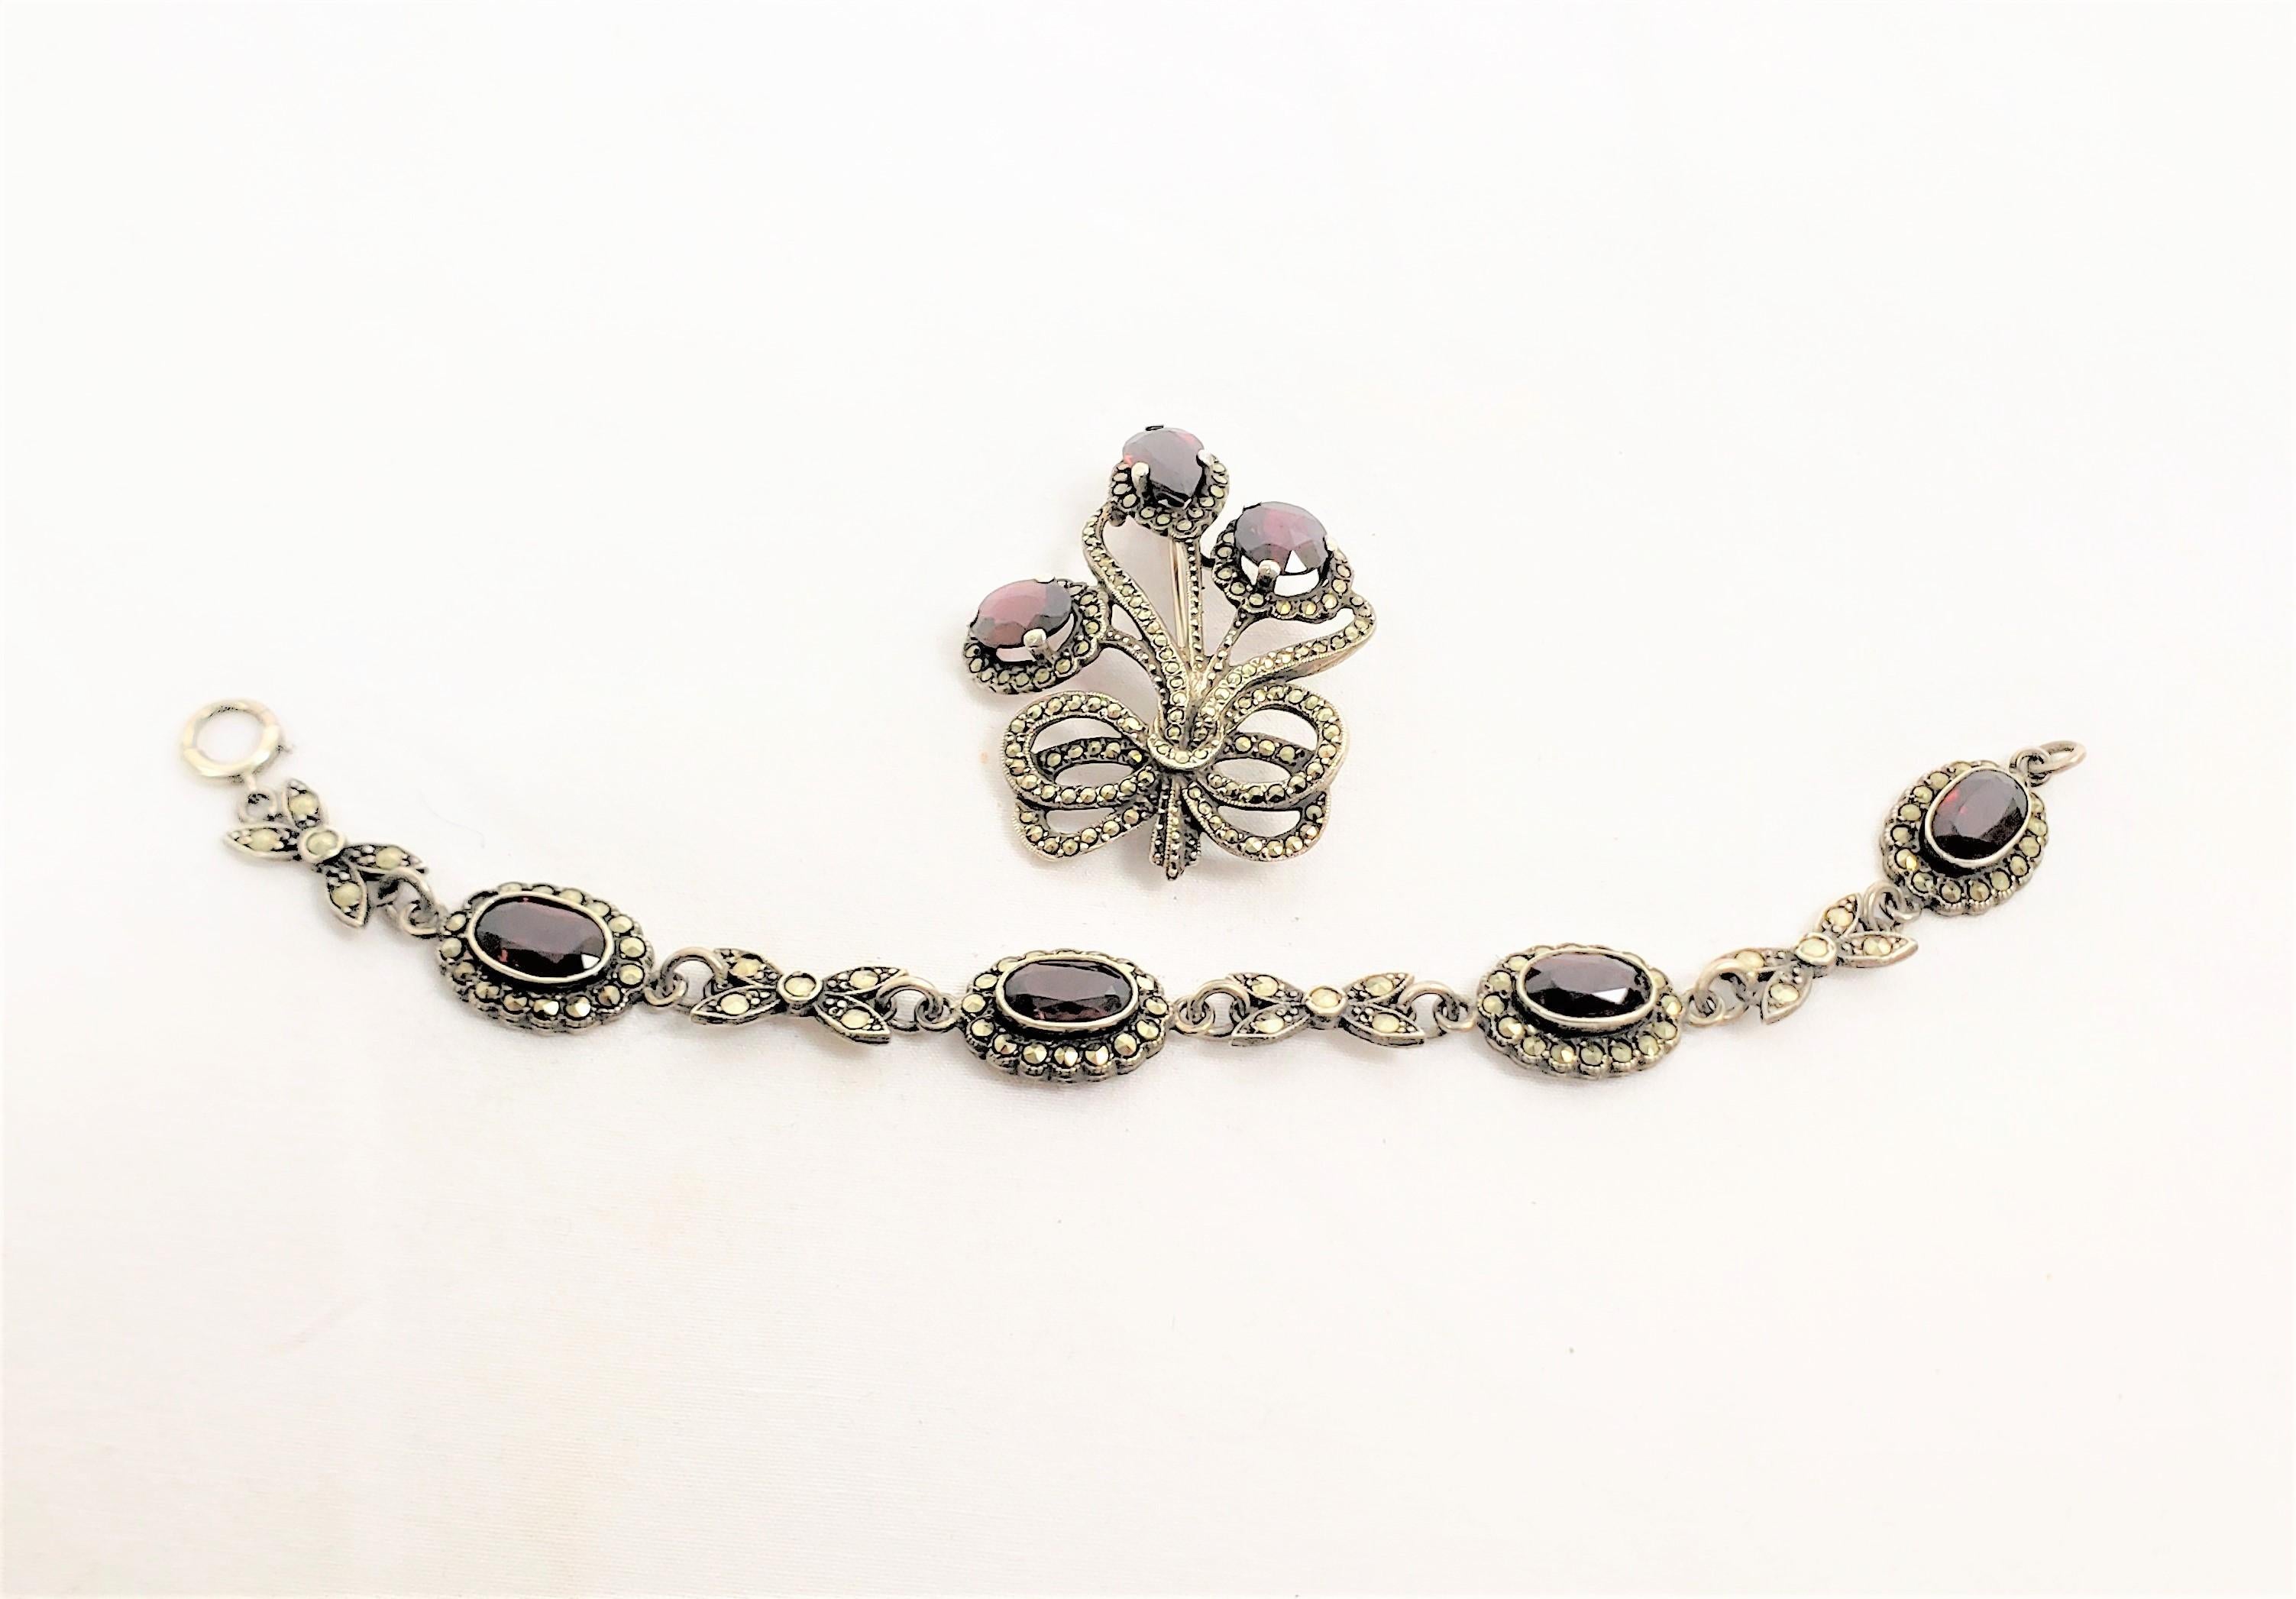 This antique brooch and bracelet set is signed by an unknown maker, and originated from England and dates to approximately 1900 and done in the period Late Victorian style. The set is composed of sterling silver with prong set cut garnet stones in